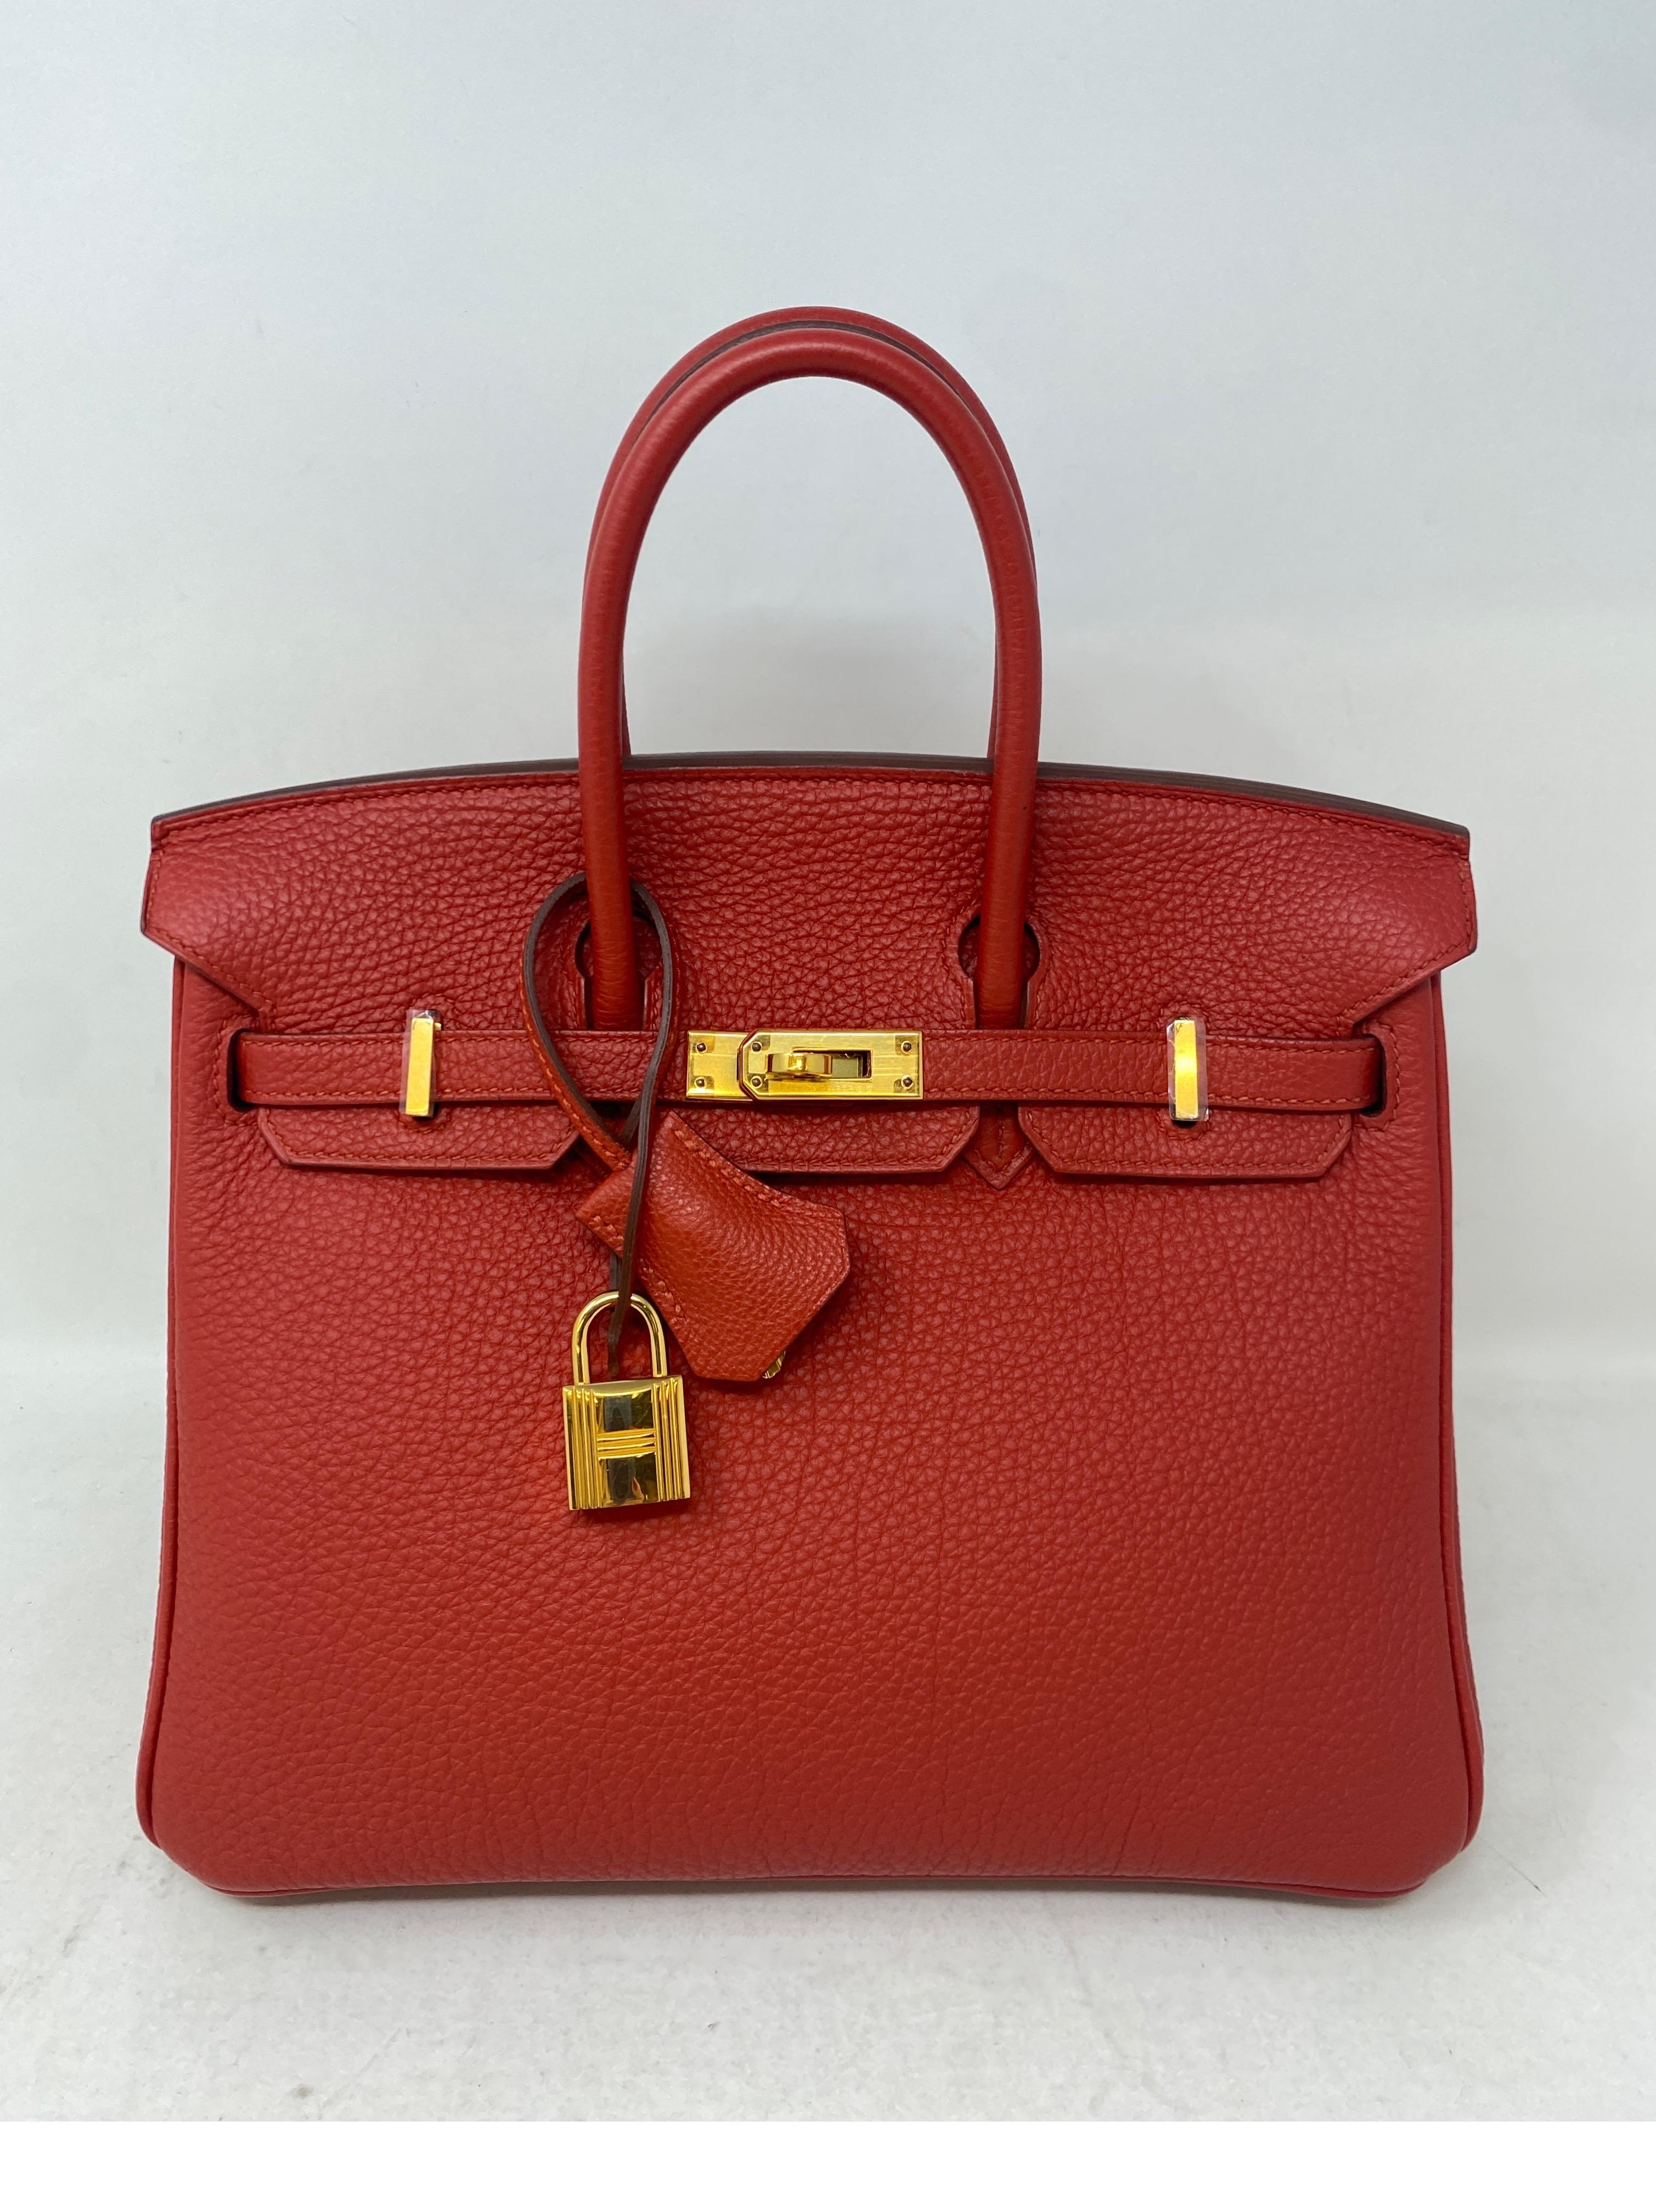 Hermes Red Birkin 25 Rouge Pivoine. Gold hardware. Gorgeous rare red color. Togo leather. Like new condition. Still has plastic on hardware. Highly coveted rare 25 size. Don't miss out. Includes clochette, lock, keys, and dust bag. Guaranteed